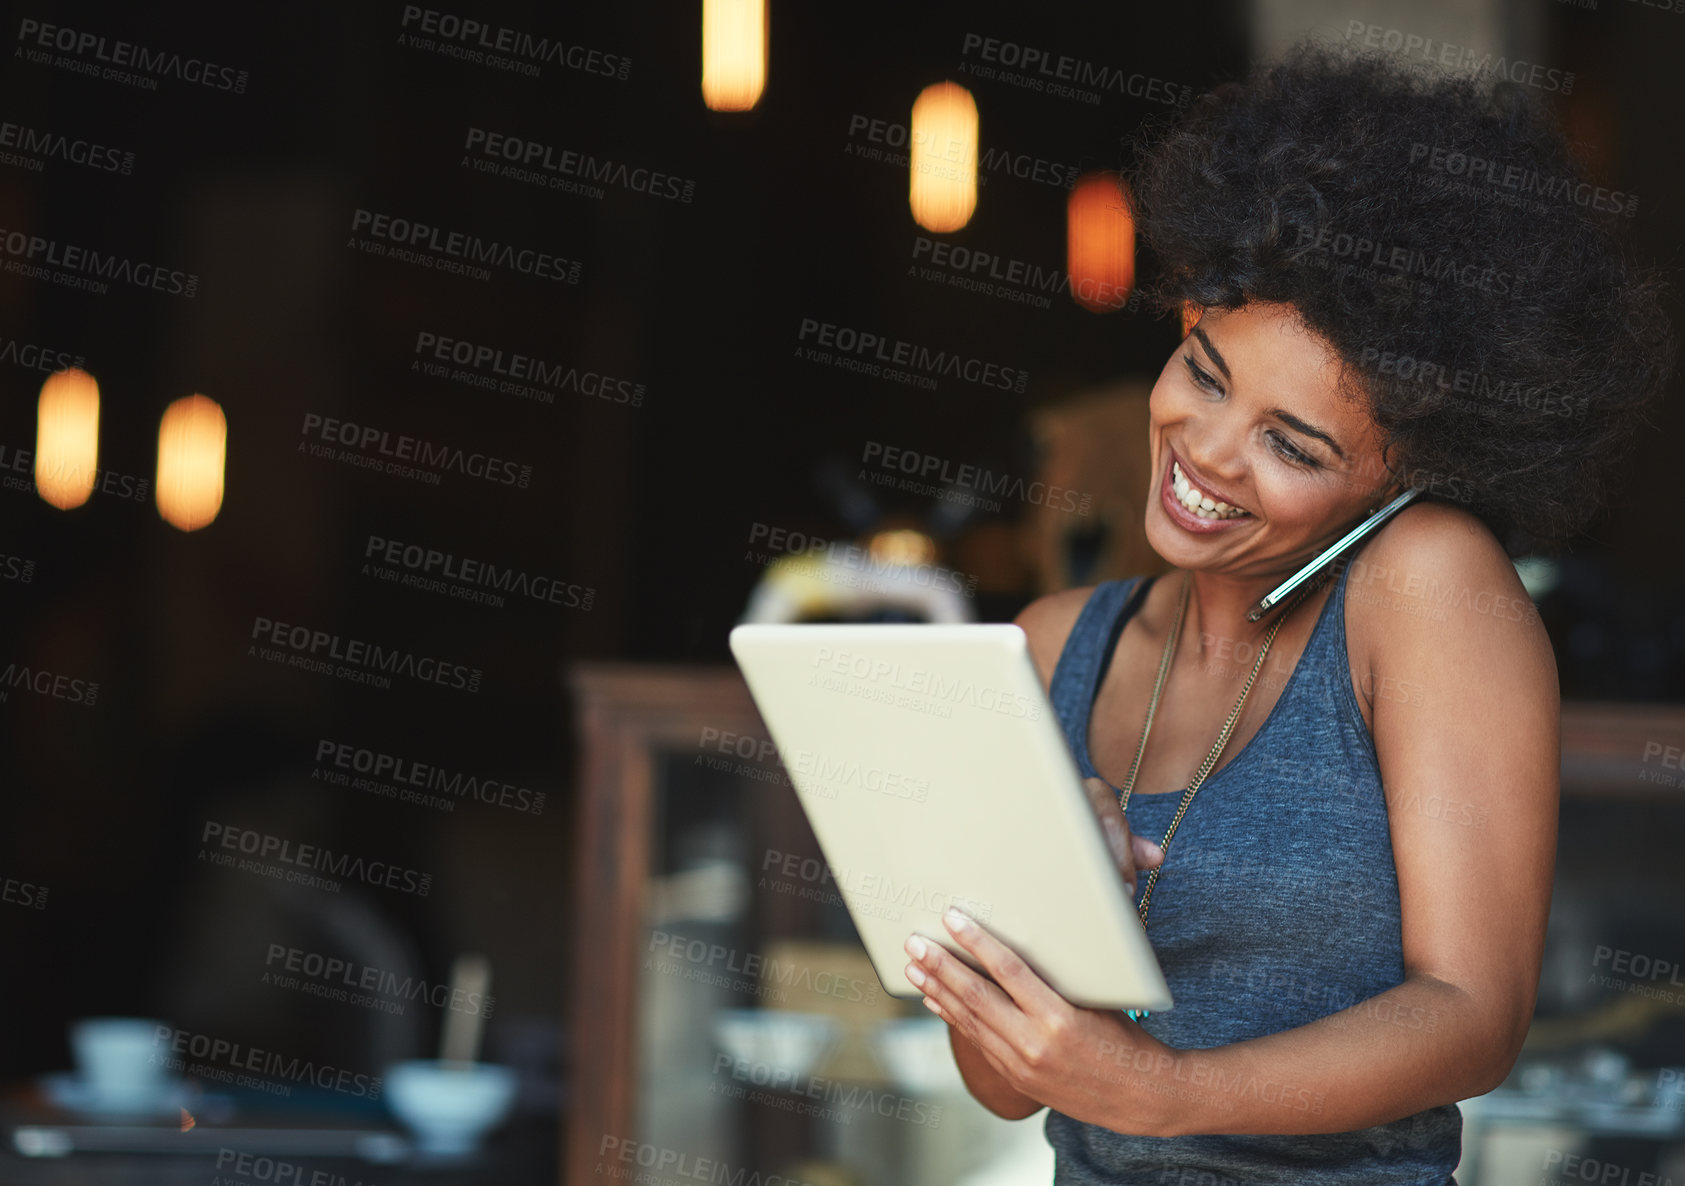 Buy stock photo Shot of a young woman using a digital tablet while talking on the phone at a cafe